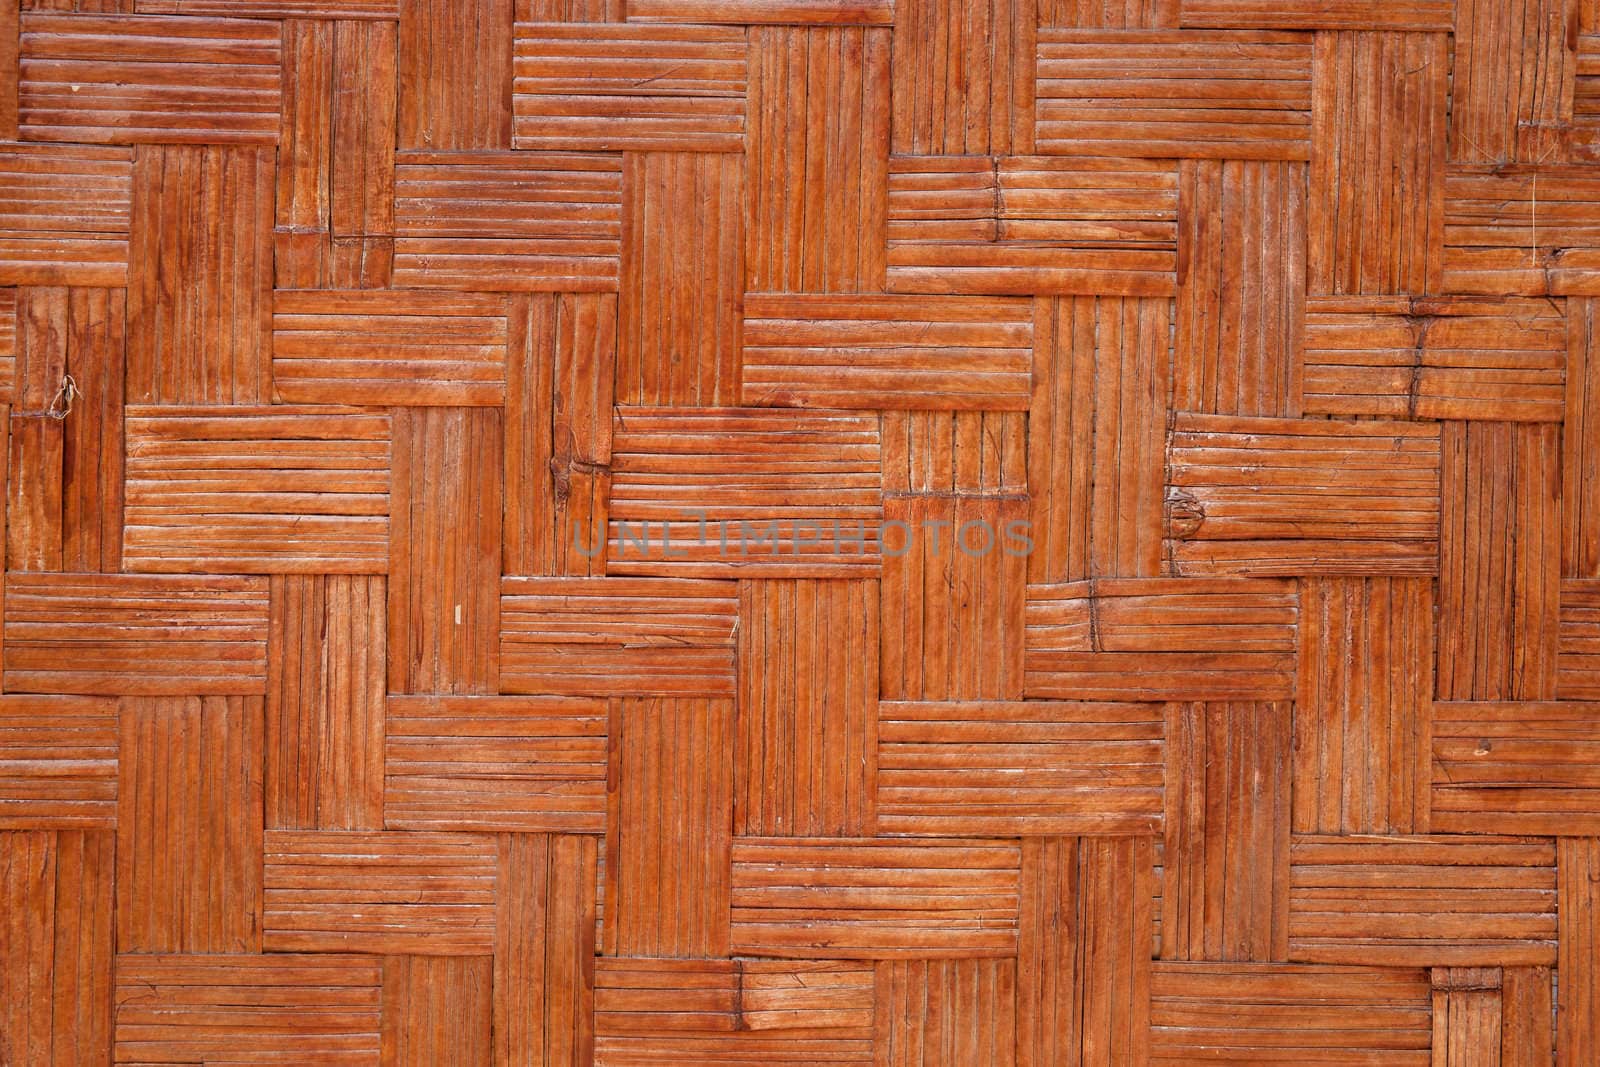 a background image of woven bamboo wood